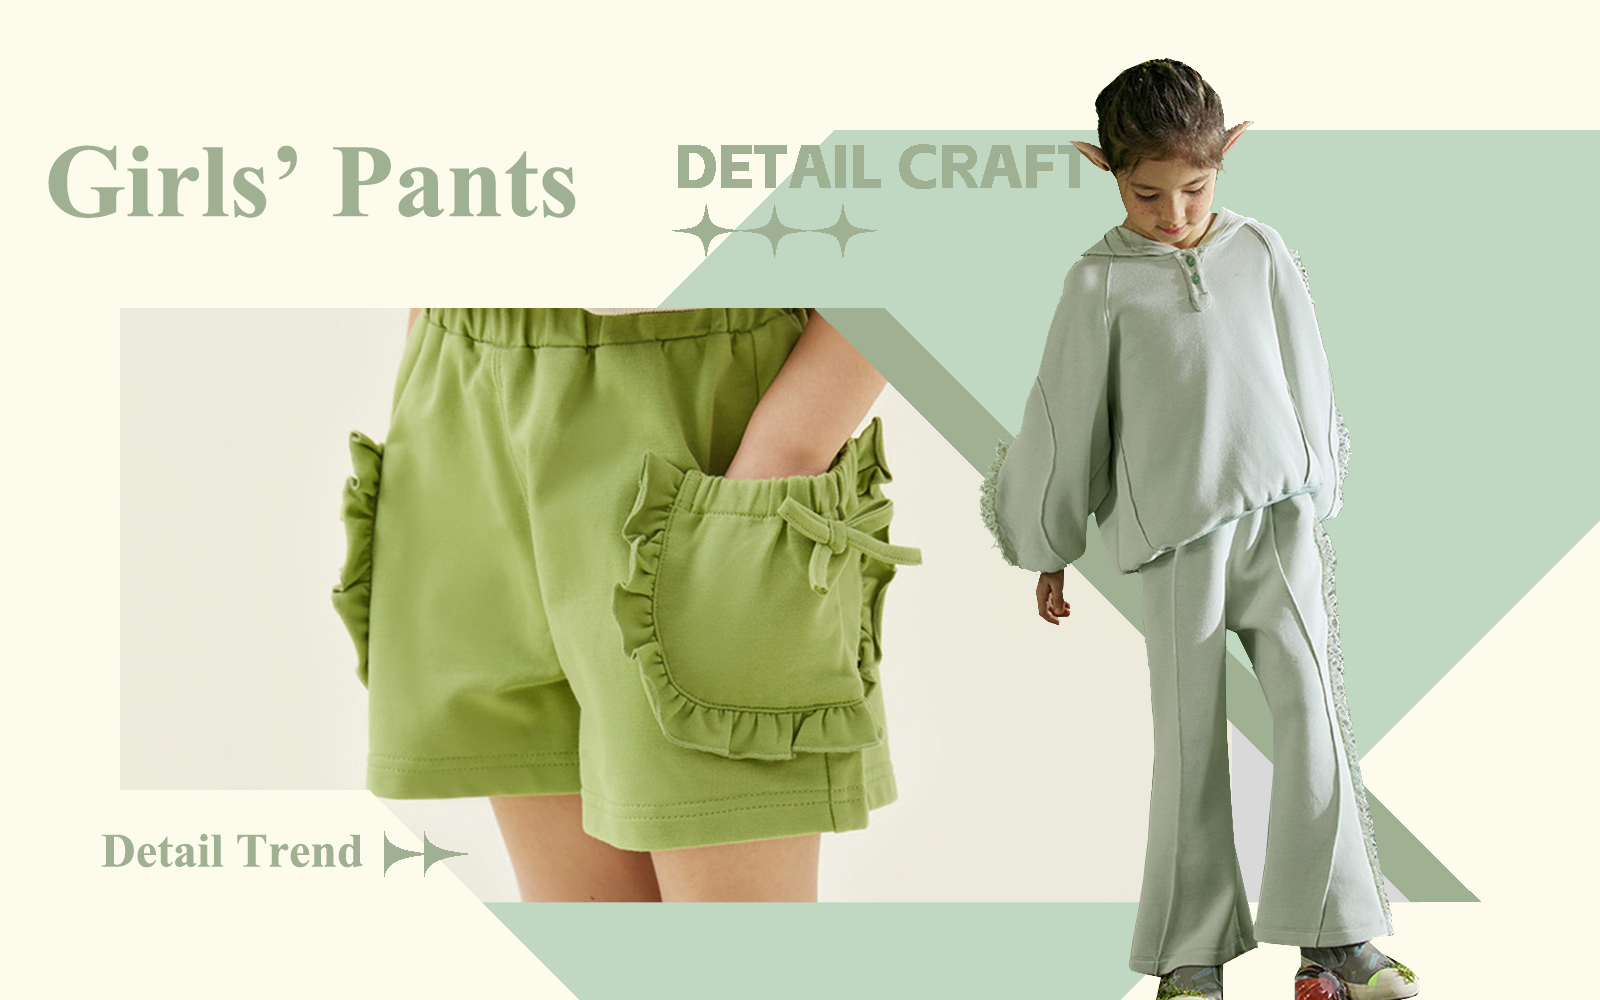 Girls' Pants -- The Detail & Craft Trend for Kidswear